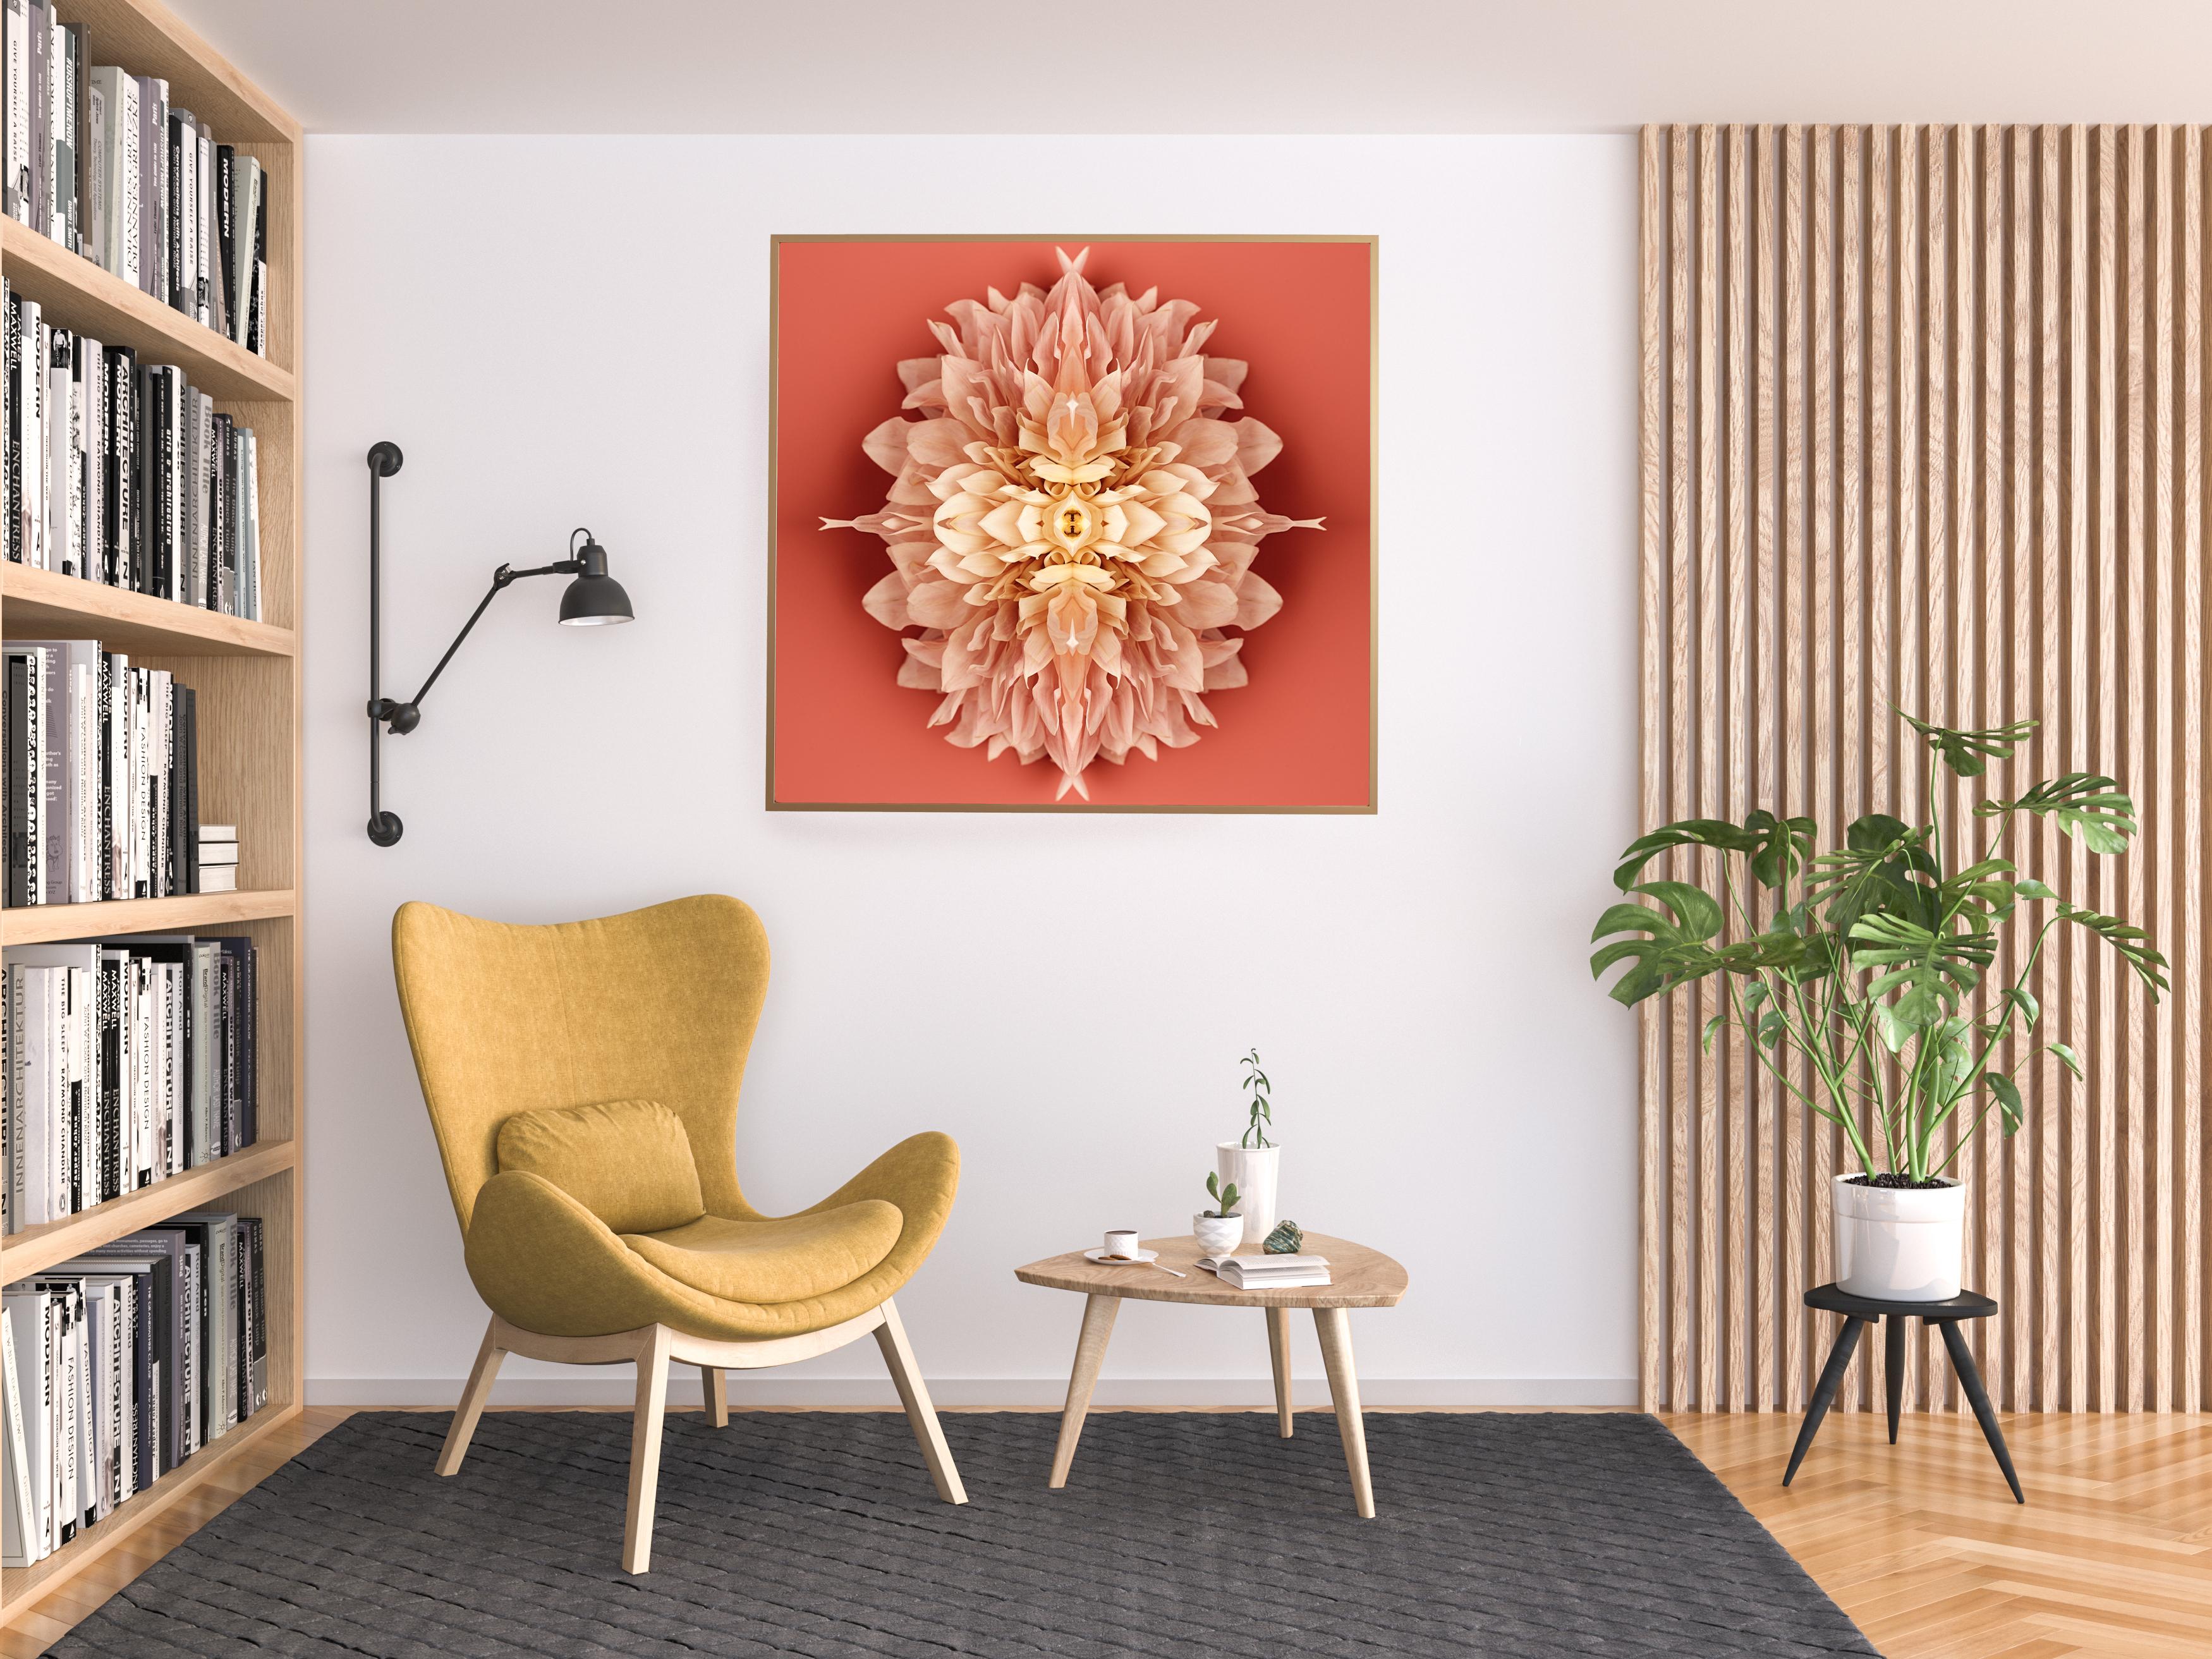 This print features the playful relationship between natural forms and botanicals. In this image Erin uses the natural composition of the light pink and yellow dahlia, and her own collage work, to create a hypnotic mandala with the floral. Some